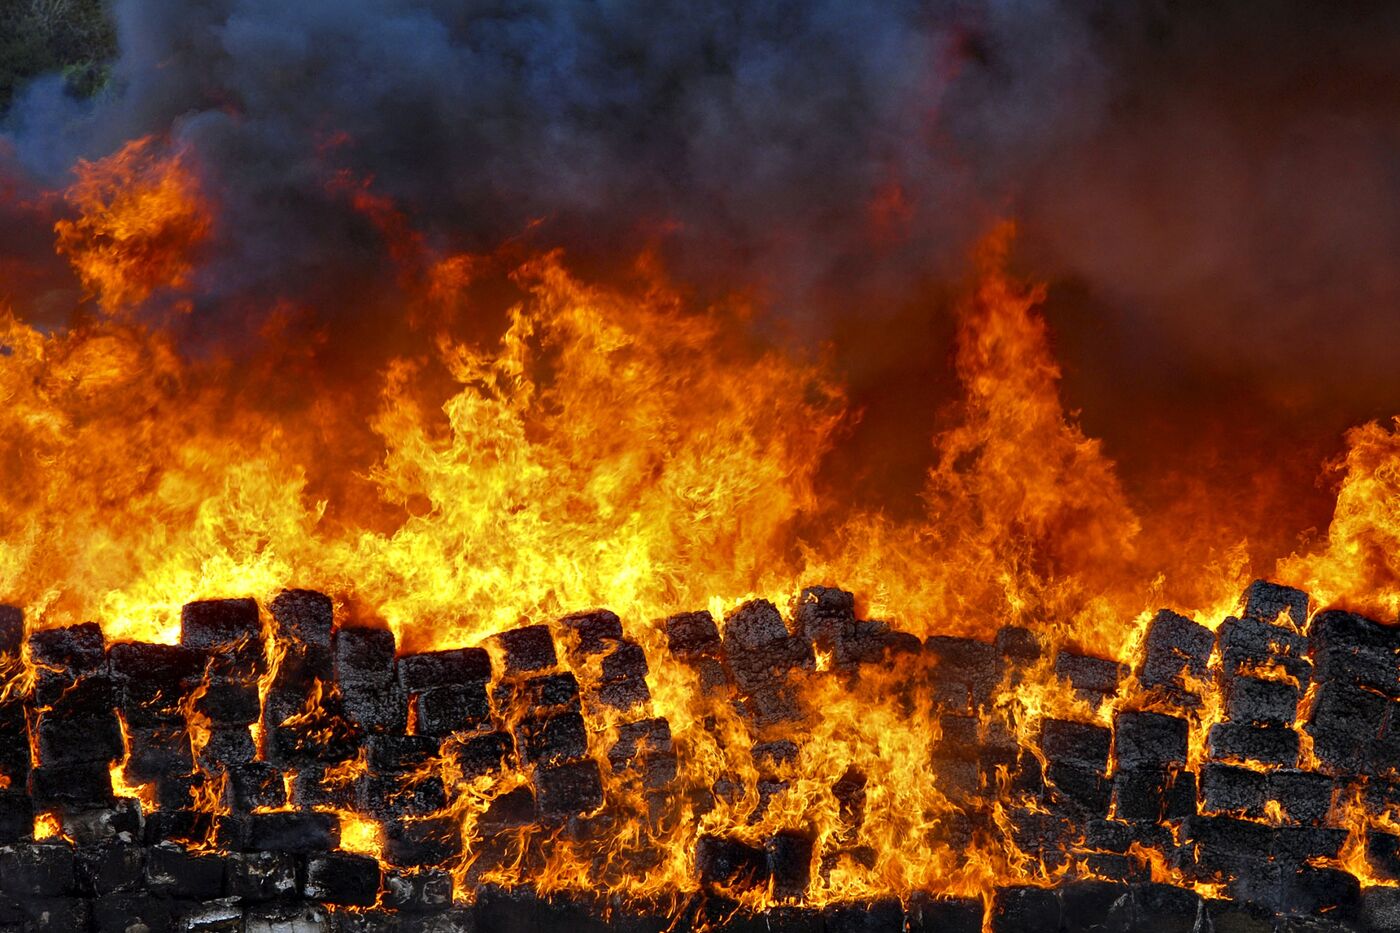 Bundles of seized marijuana are incinerated at a military base in Tijuana.